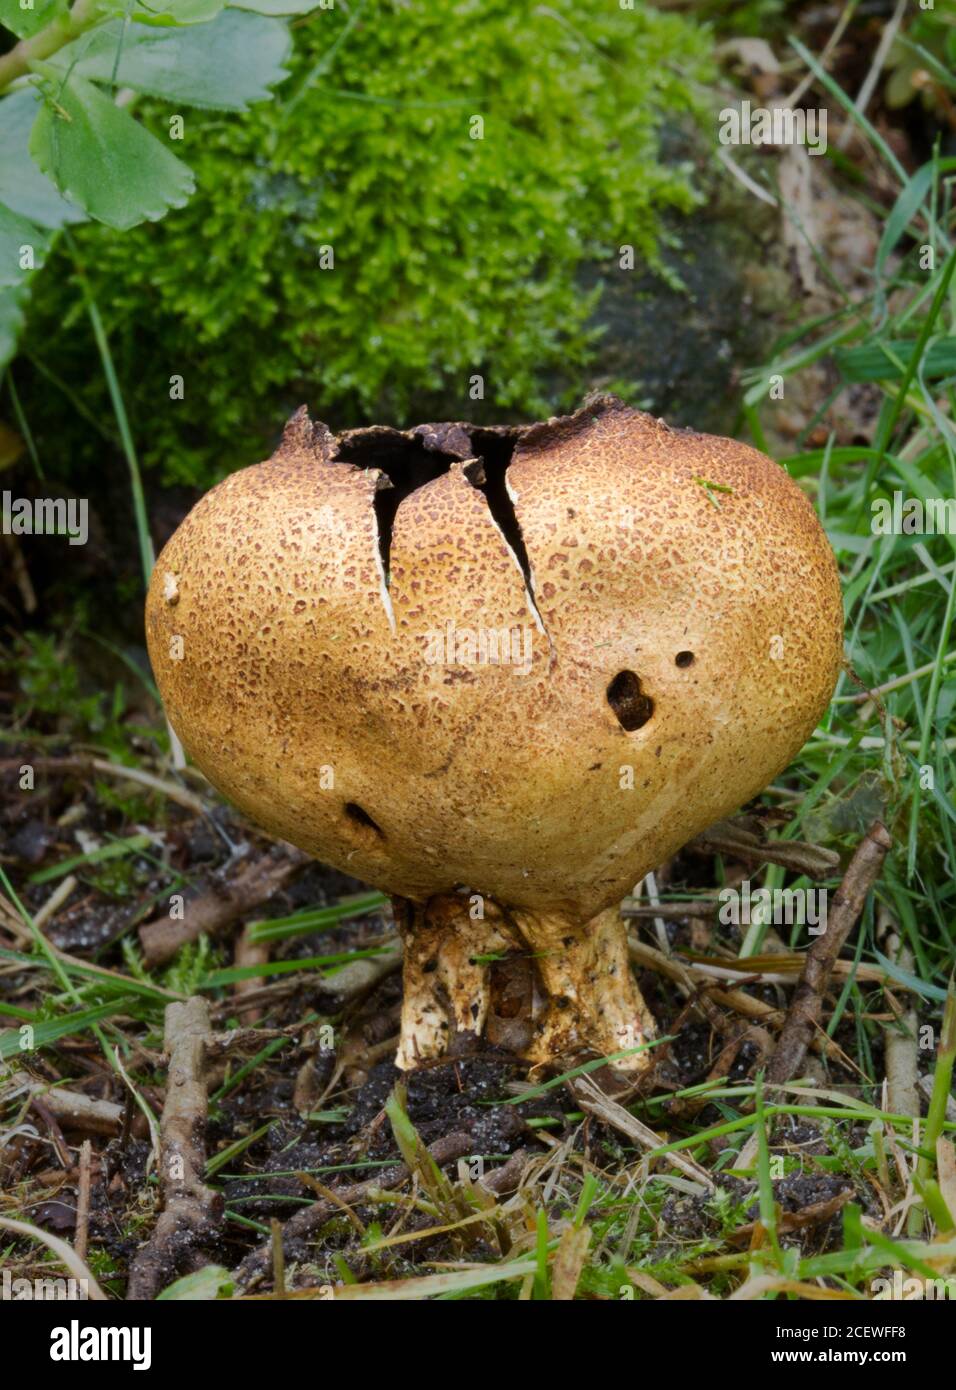 Close-up of a Scaly Earthball, Scleroderma verrucosum, an Earth ball fungus Stock Photo